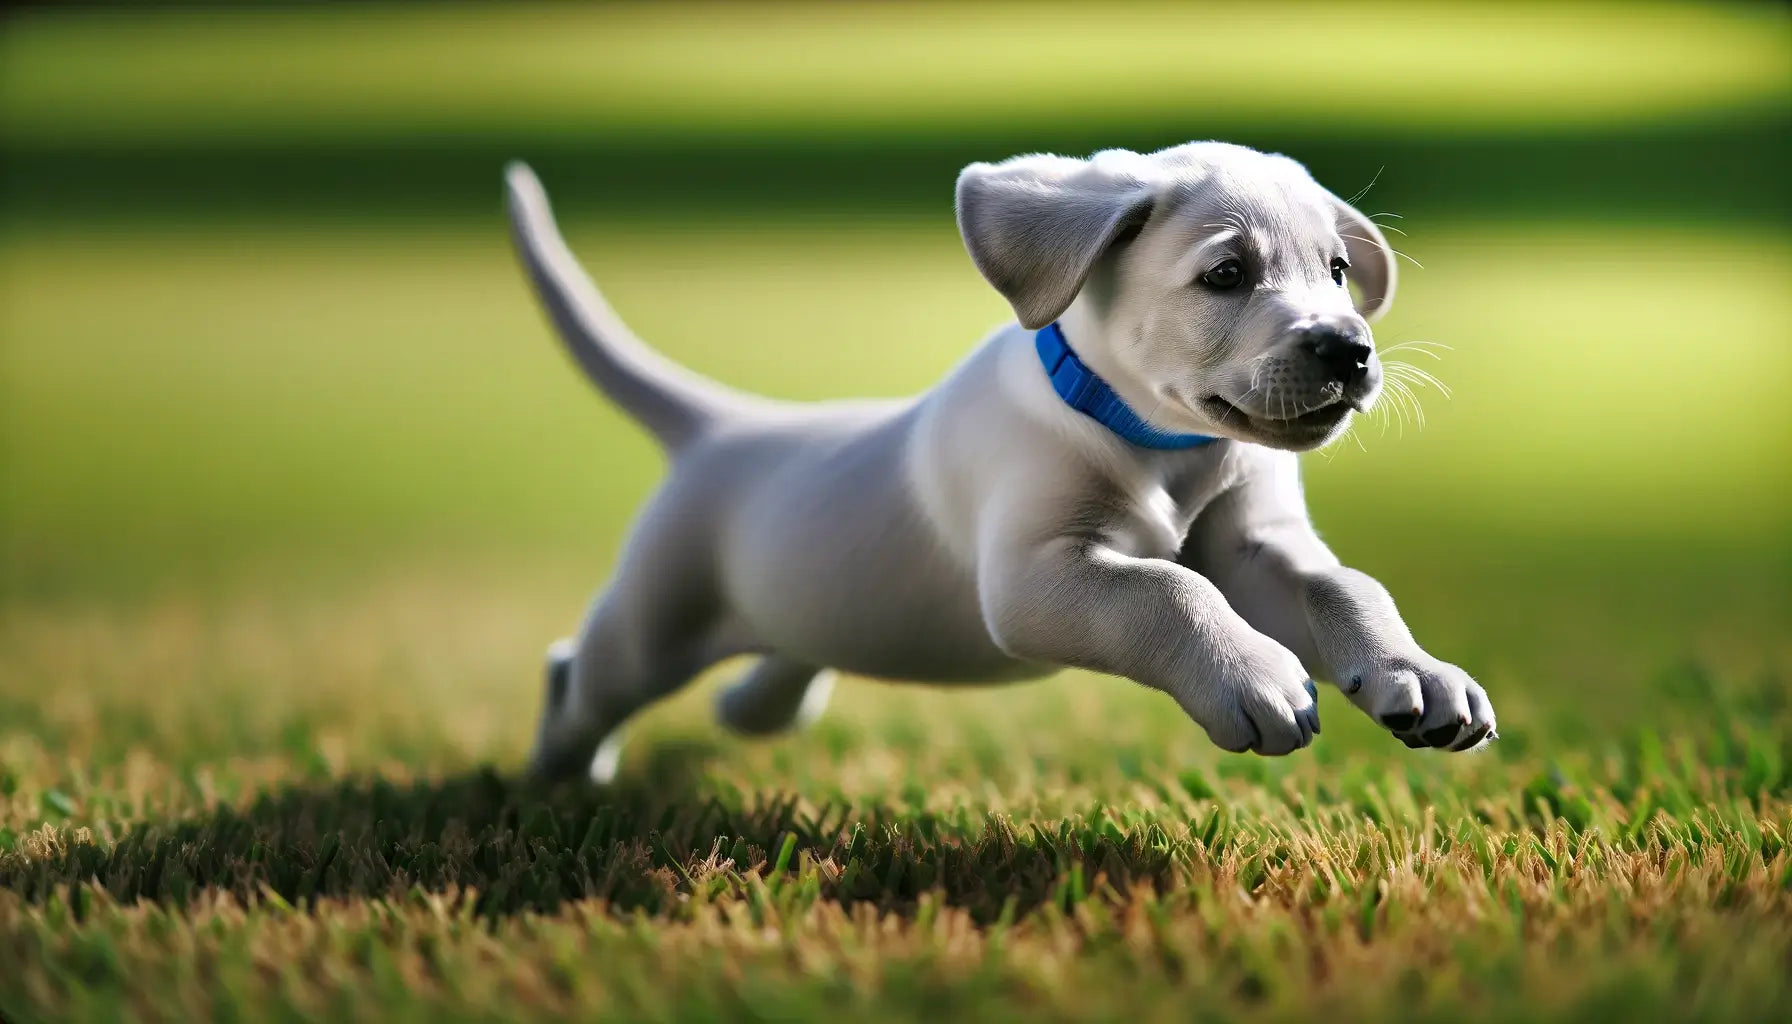 A Silver Lab puppy with a blue collar captured mid-stride on grass, showcasing a playful and energetic demeanor.